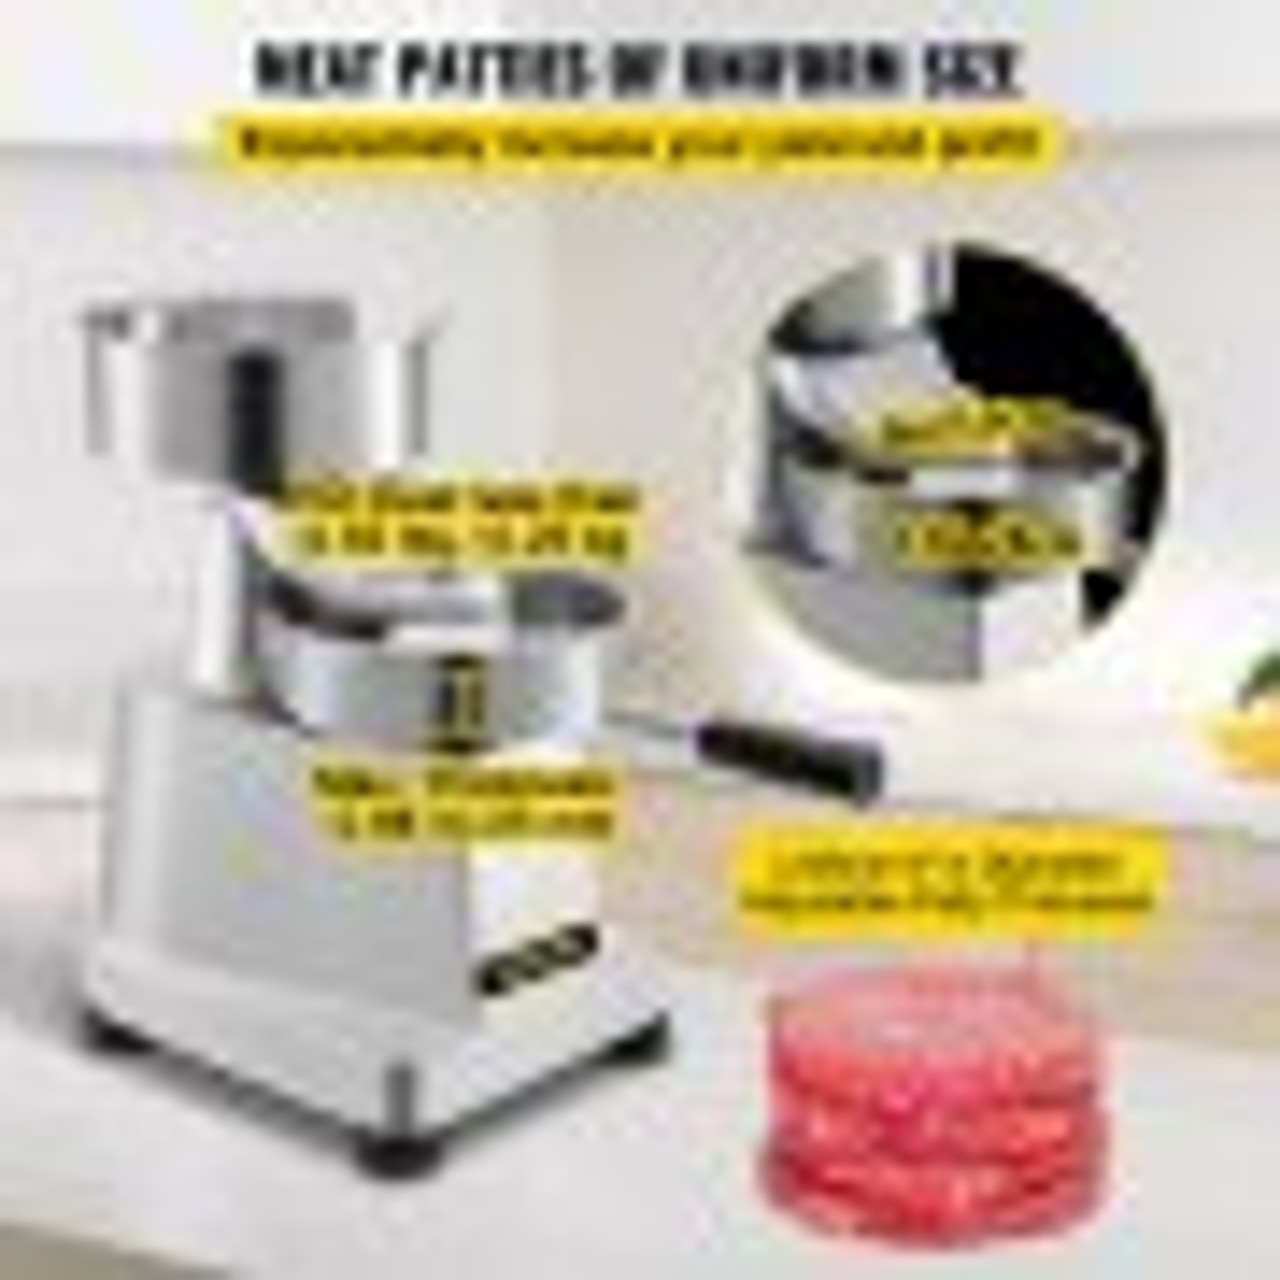 Commercial Hamburger Patty Maker 150mm/6inch Stainless Steel Burger Press Heavy Duty Hamburger Press Meat Patty Maker Hamburger Forming Processor with 1000 Pcs Patty Papers